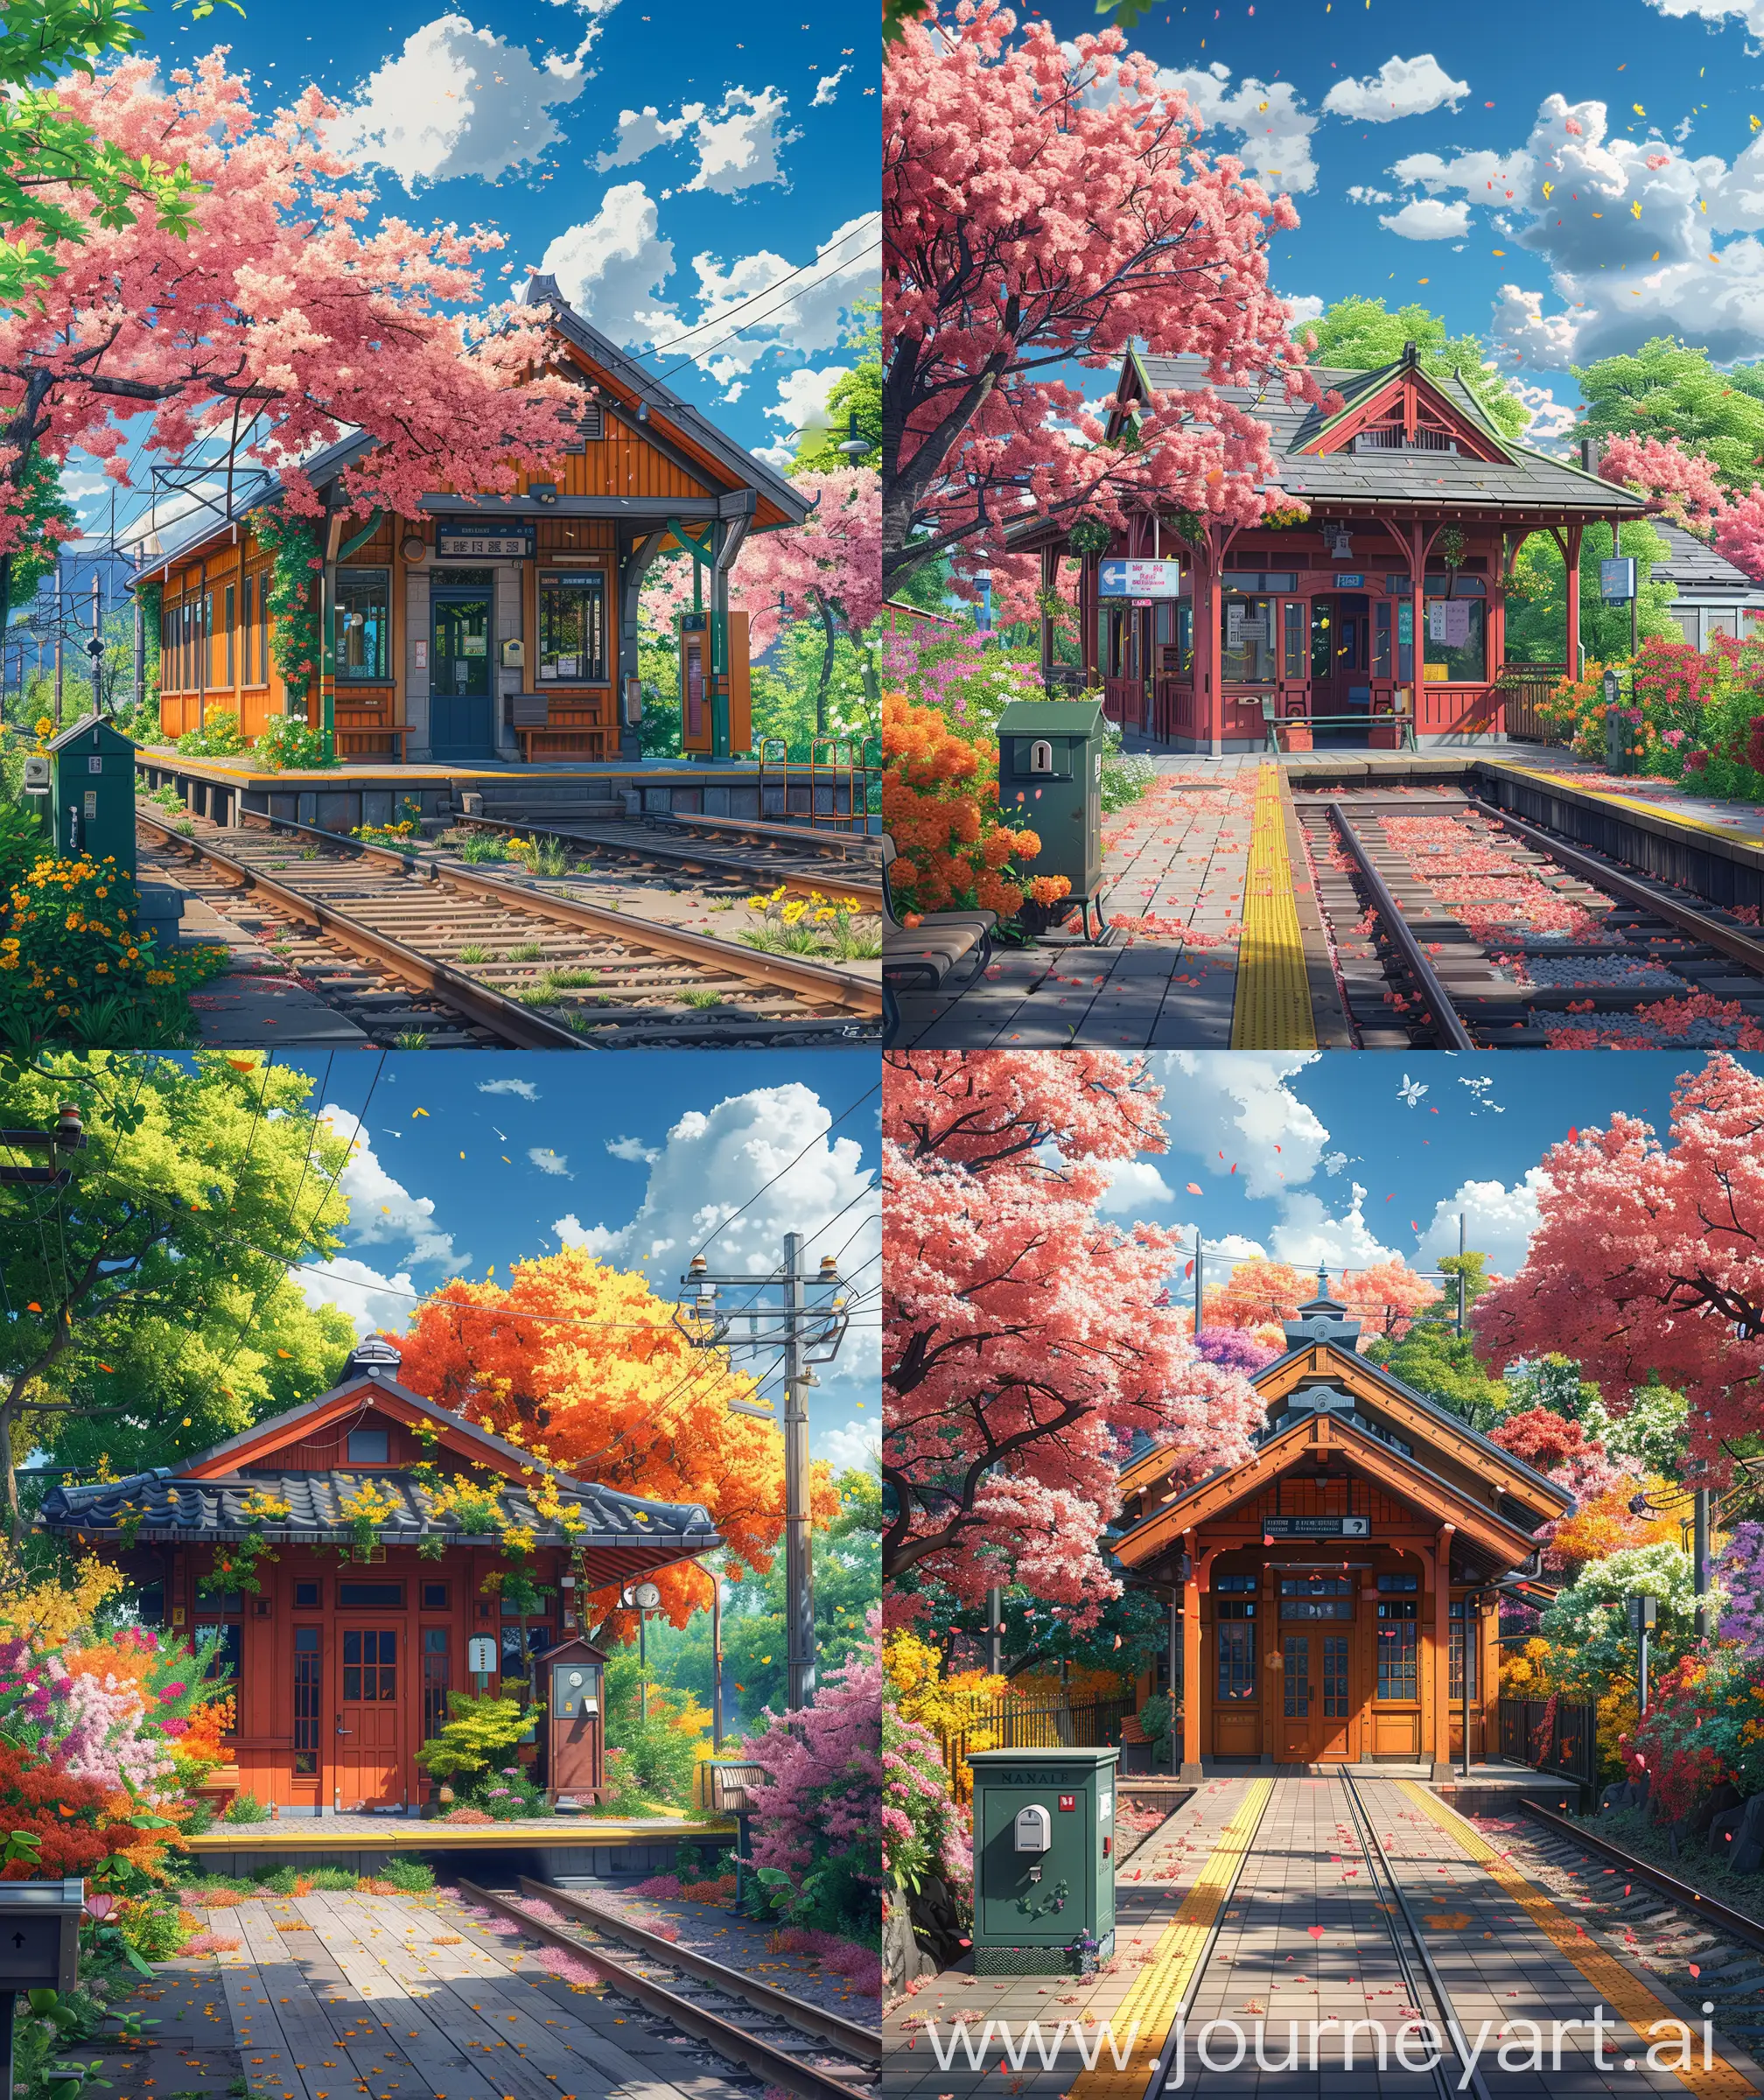 Anime scenary, illustration, direct front facade, anime style montreal suburban colorful rail station, colorful flower brushes, flower tree around, mail box, platform, colorful and vibrant, day time, summer time view, breeze, illustration, anime scenary, ultra HD, high quality, sharp details, no blurry image, no hyperrealistic --ar 27:32 --s 600